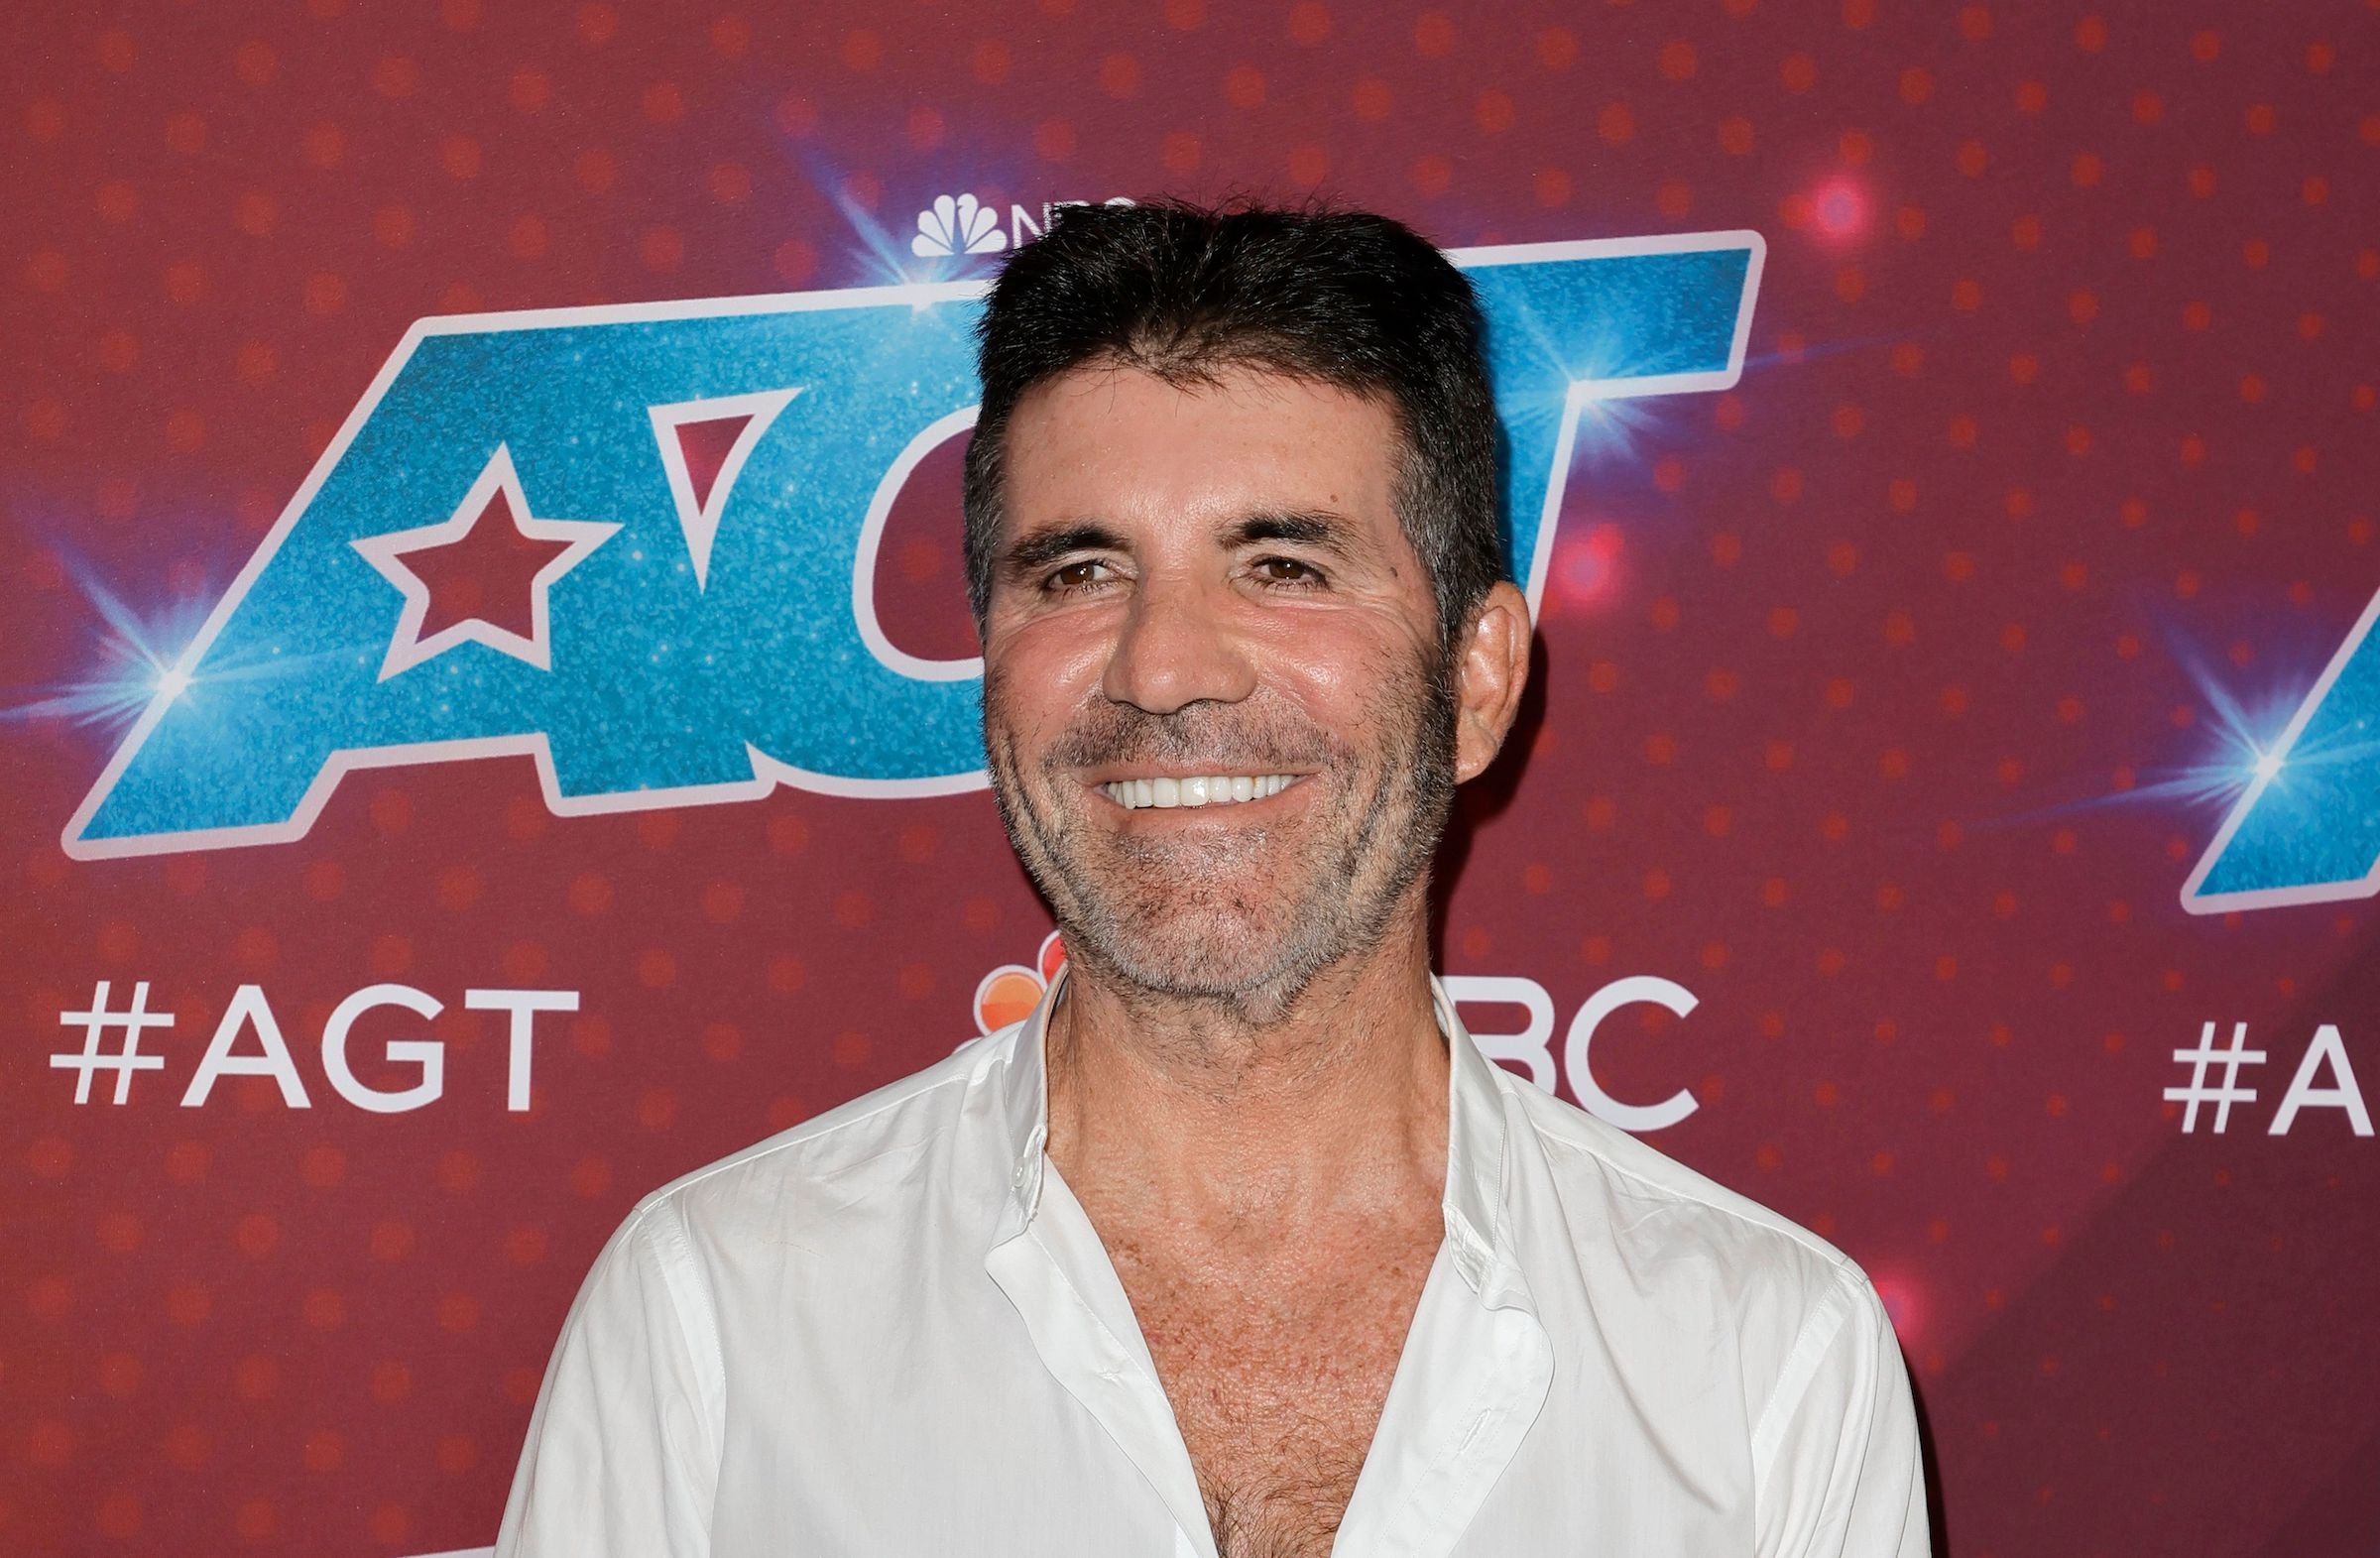 Simon Cowell Said Jennifer Hudson Is ‘The Epitome of The American Dream’